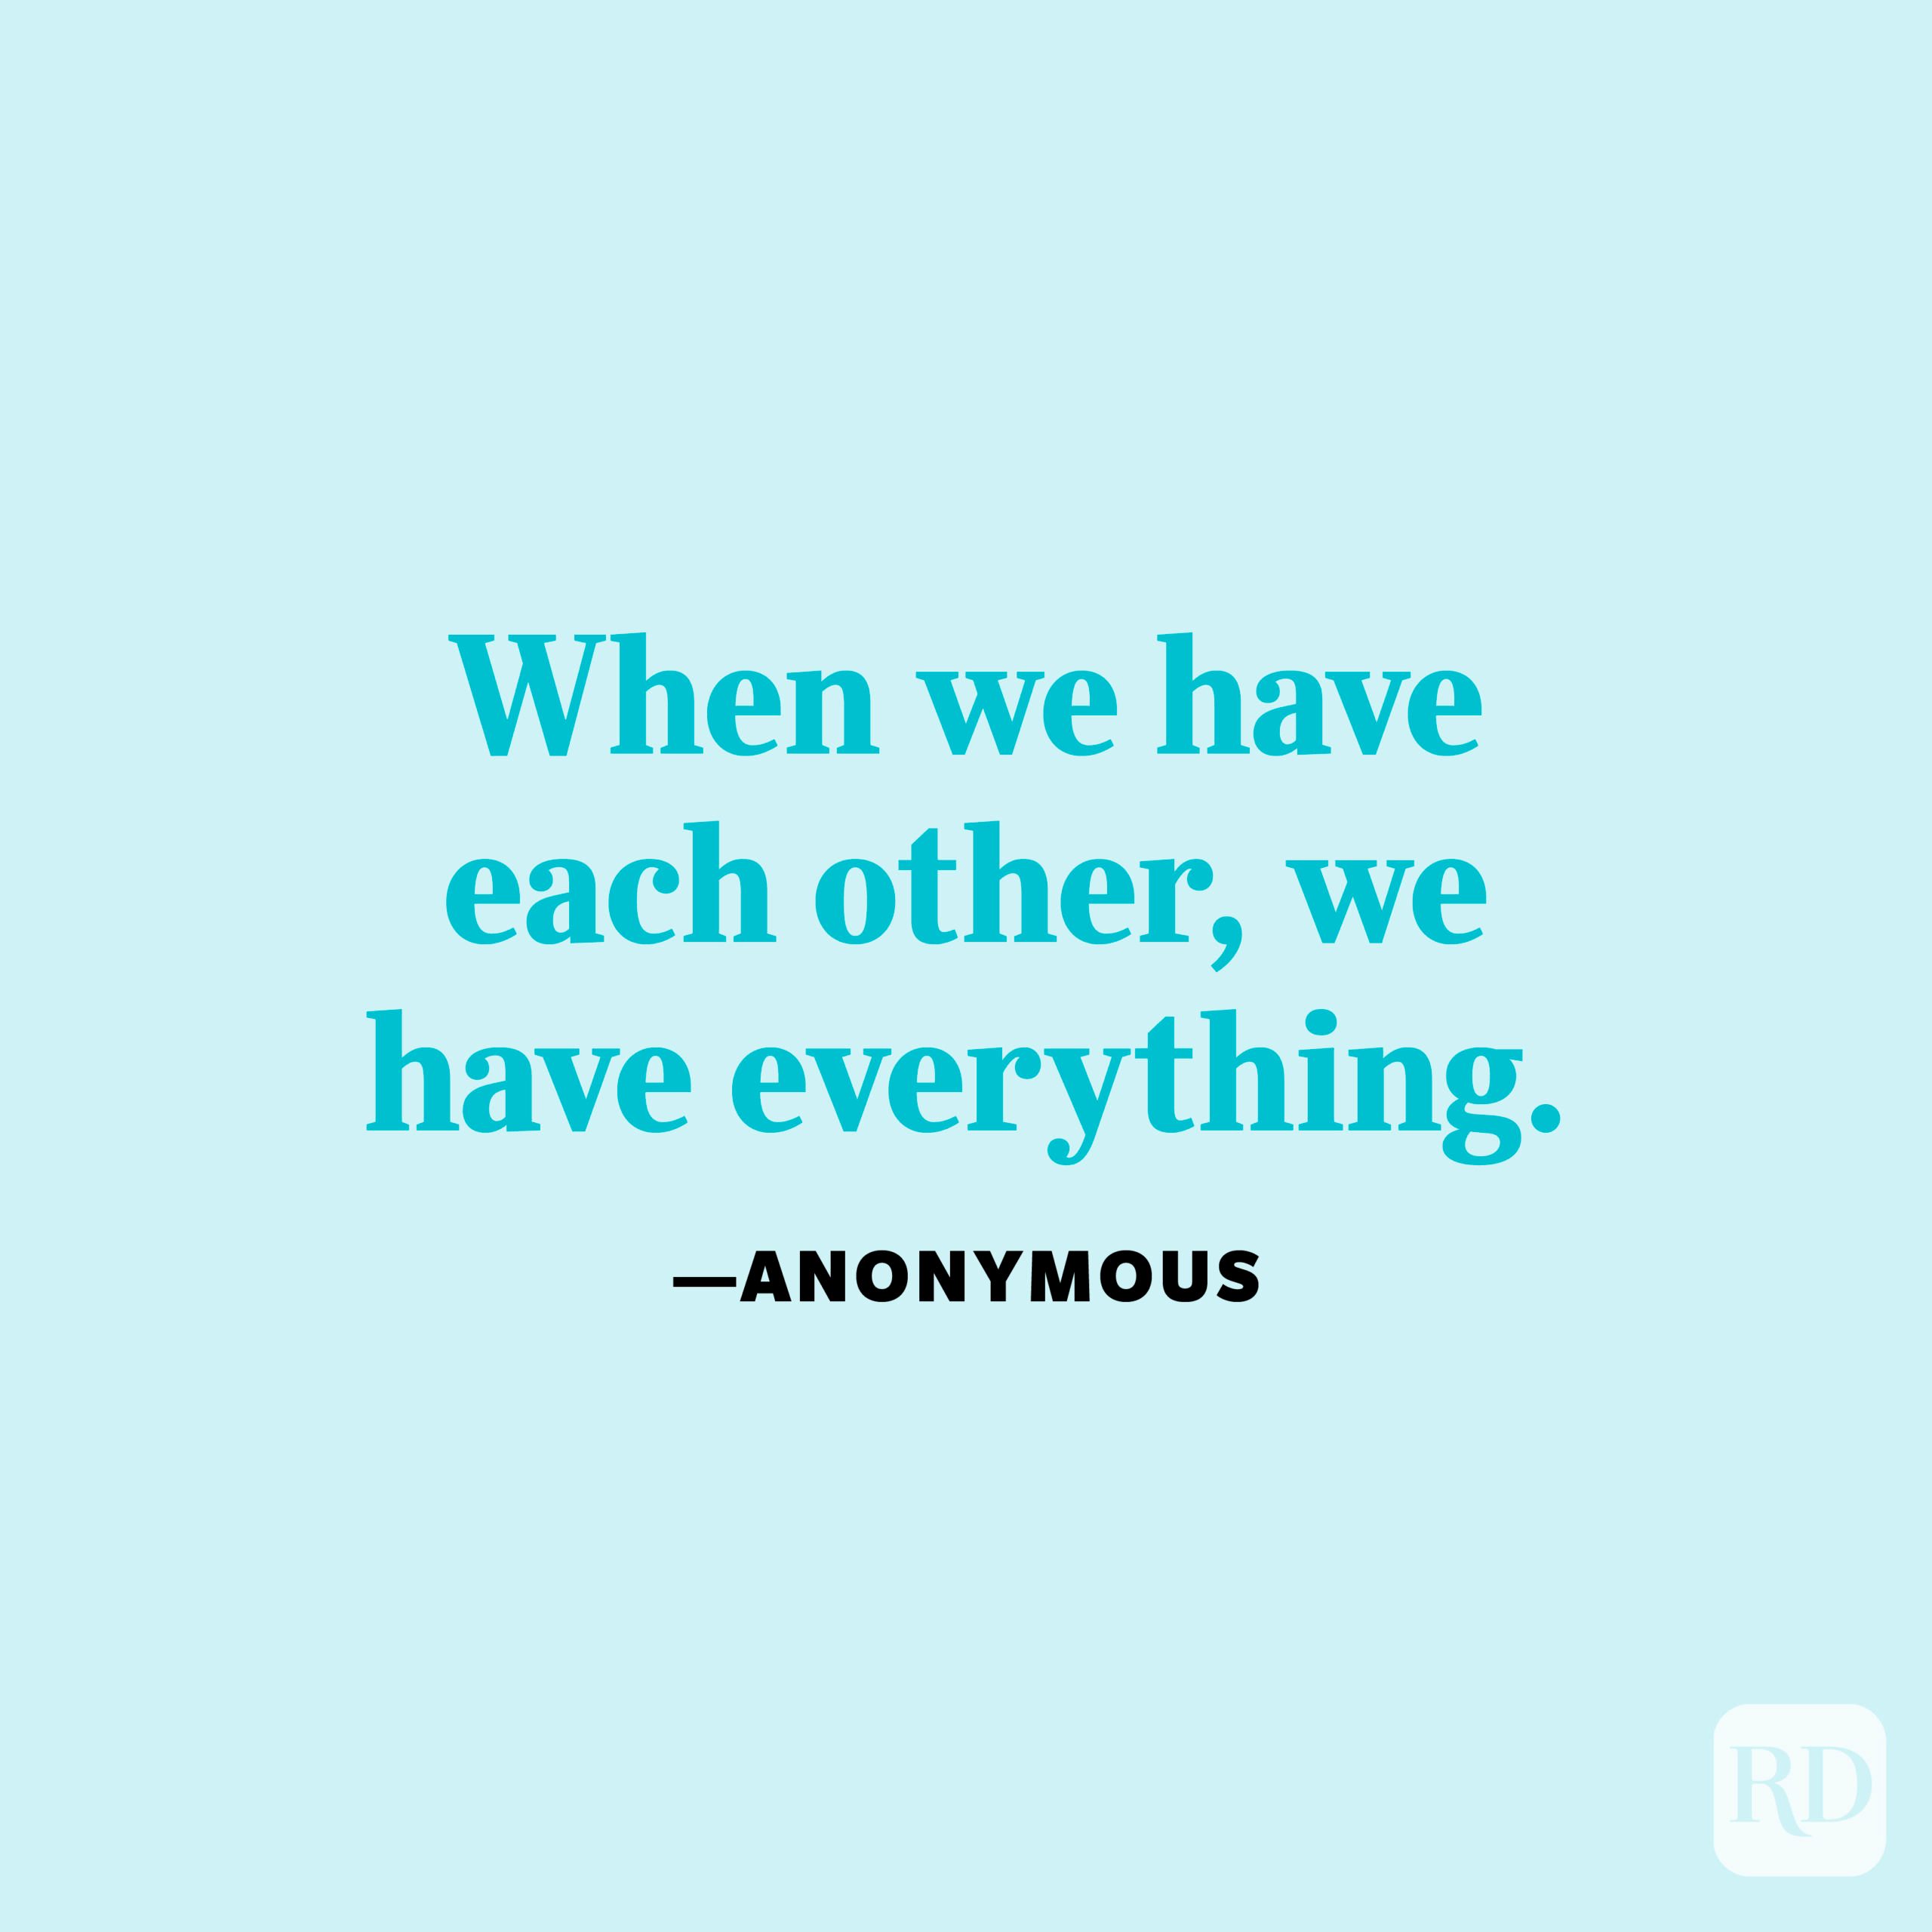 "When we have each other, we have everything." —Anonymous